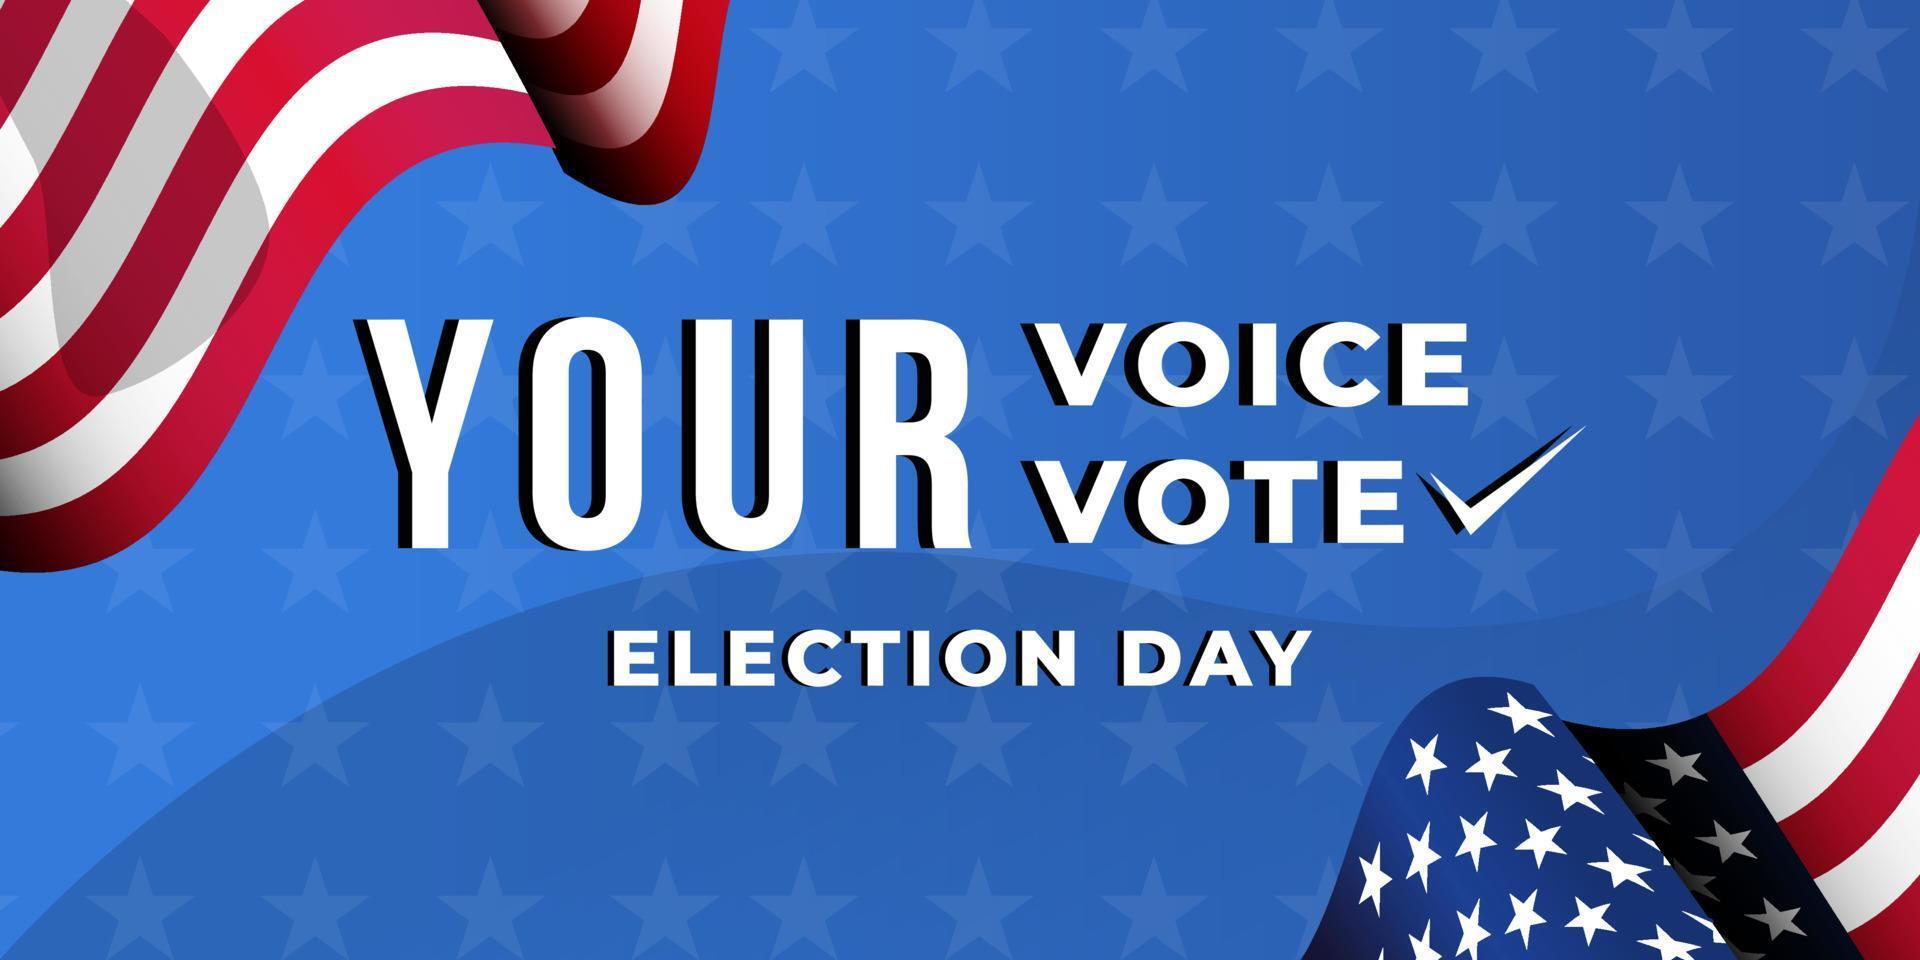 your voice your vote, american election day background. usa election day banner vector